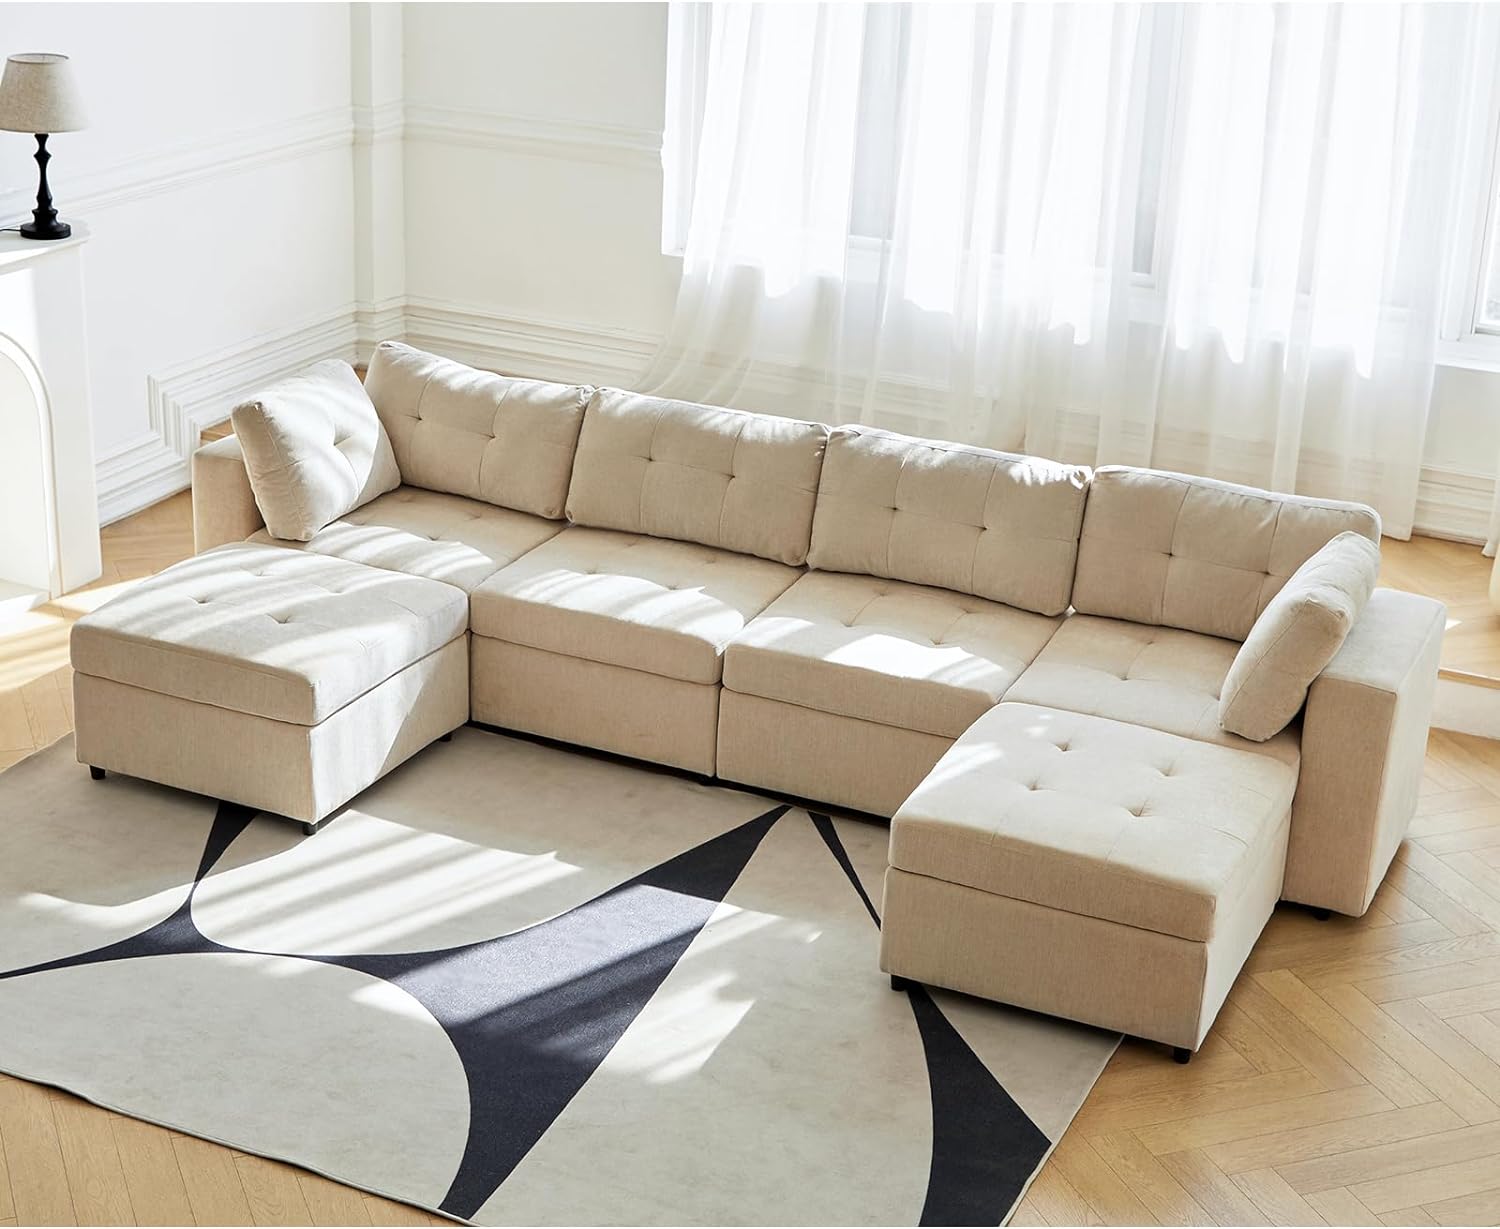 HULALA HOME Modular Sectional Sofa, U Shaped Couch with Storage and Wide Armrest,135 Inch Chenille Oversized Sleeper Sofas Set for Living Room,Beige